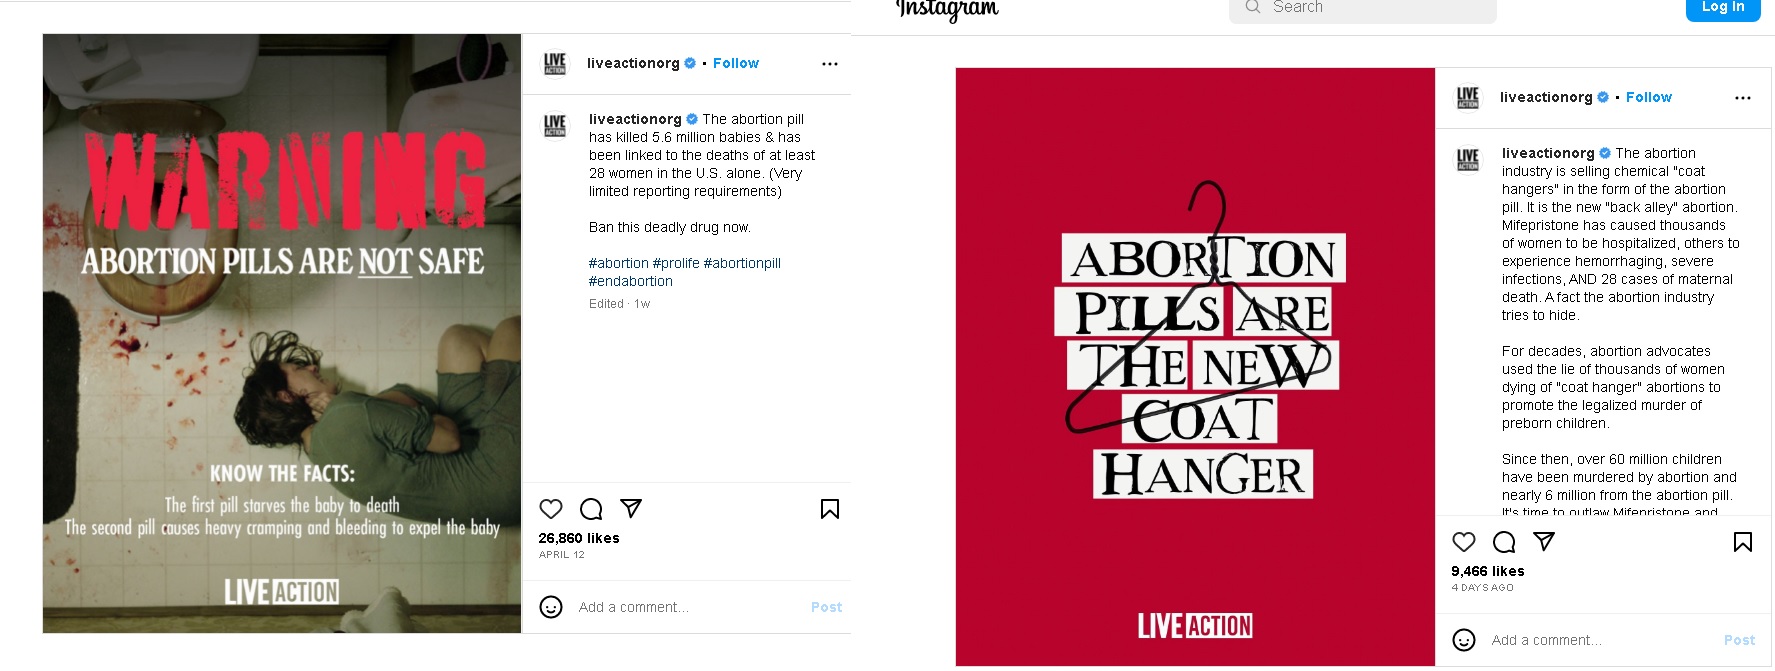 Image: Live Action abortion pill deaths via Instagram